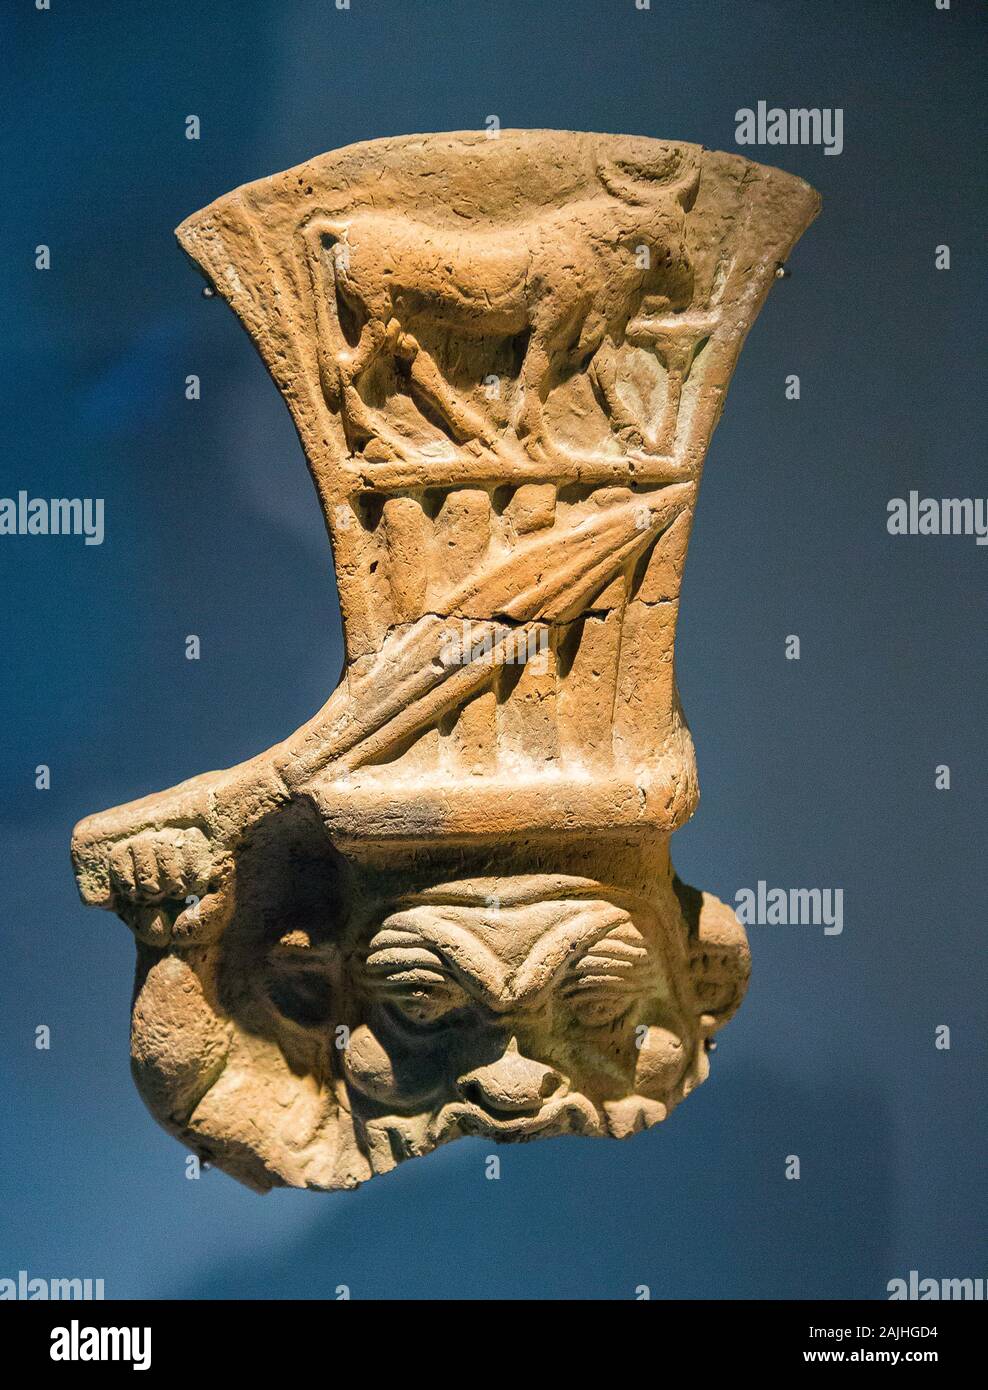 Photo taken during the opening visit of the exhibition “Osiris, Egypt's Sunken Mysteries”. Statuette of the god Bes. Stock Photo